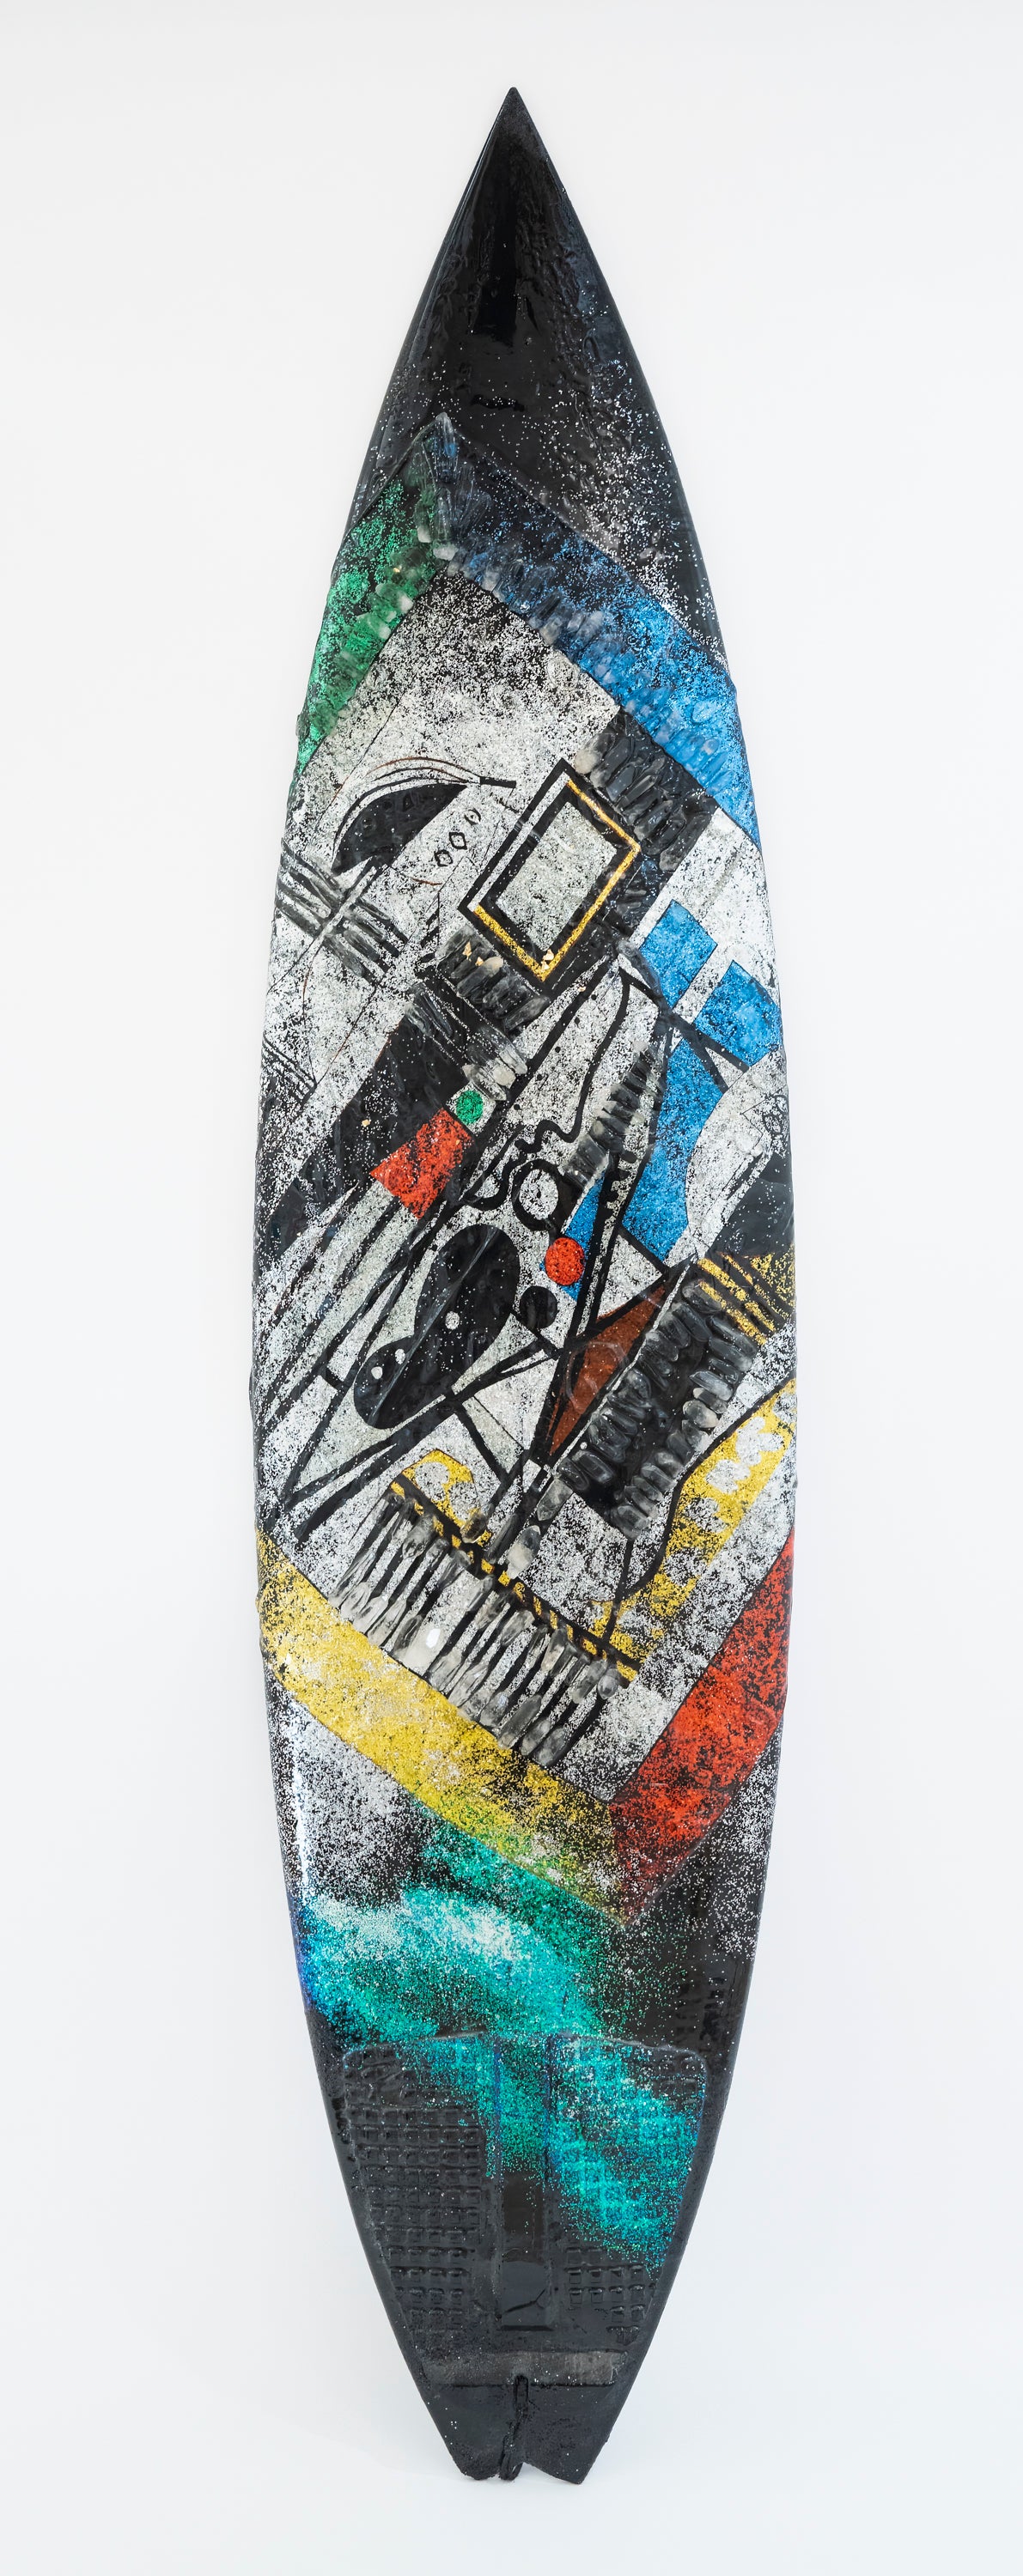 Fine art Collection - surfboard - "Dream Chaser"